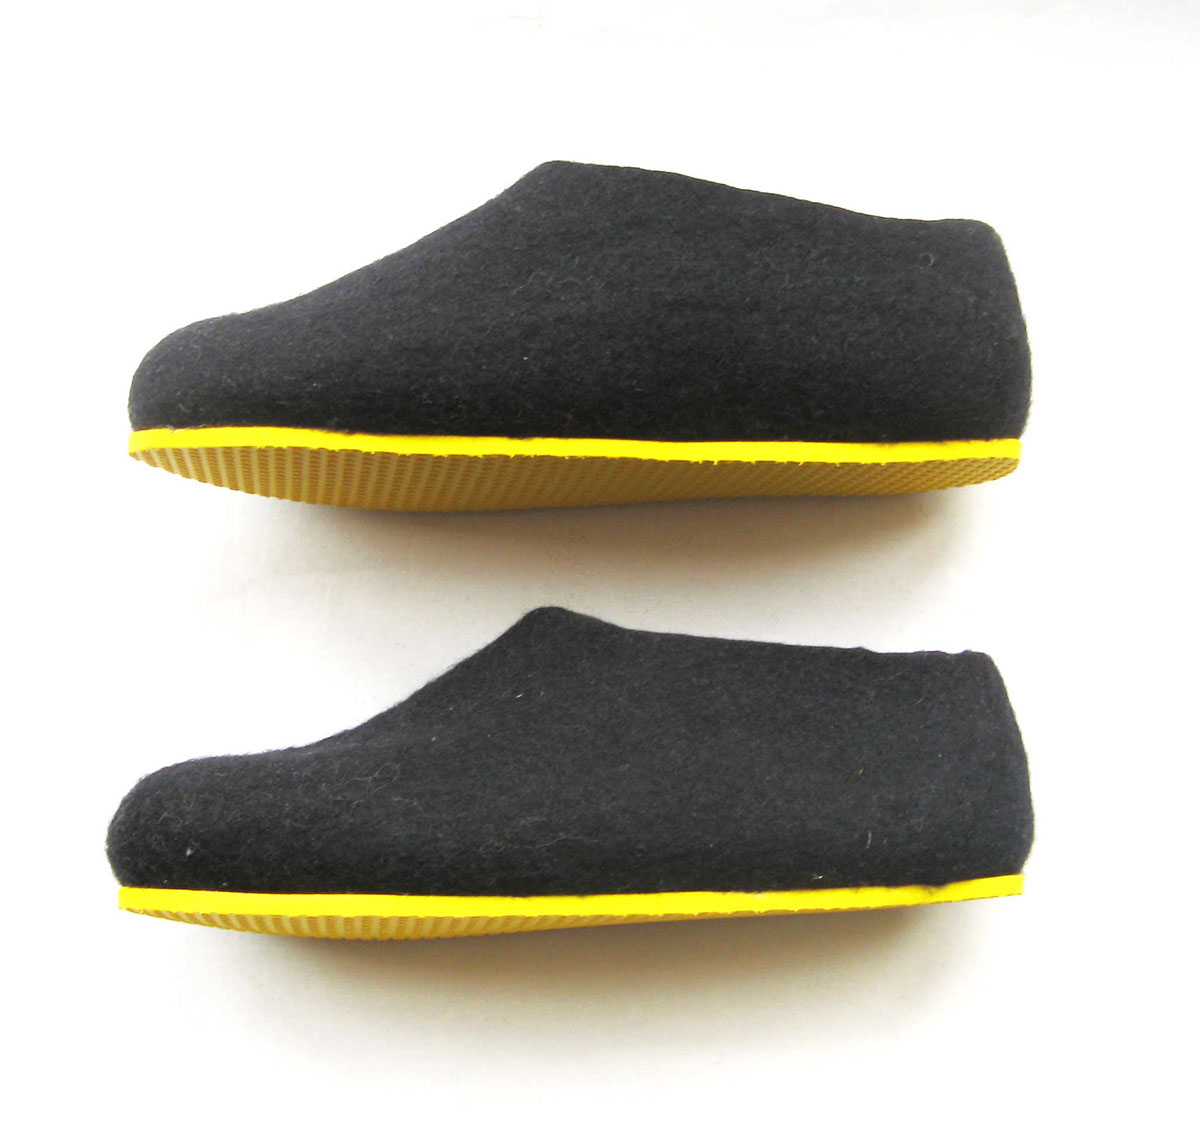 felted shoes  felting  wool  wool shoes  felted slippers  contrast color  red sole  yellow sole  fashion  footwear  made to custom made  original shoes  Outdoor  indoor